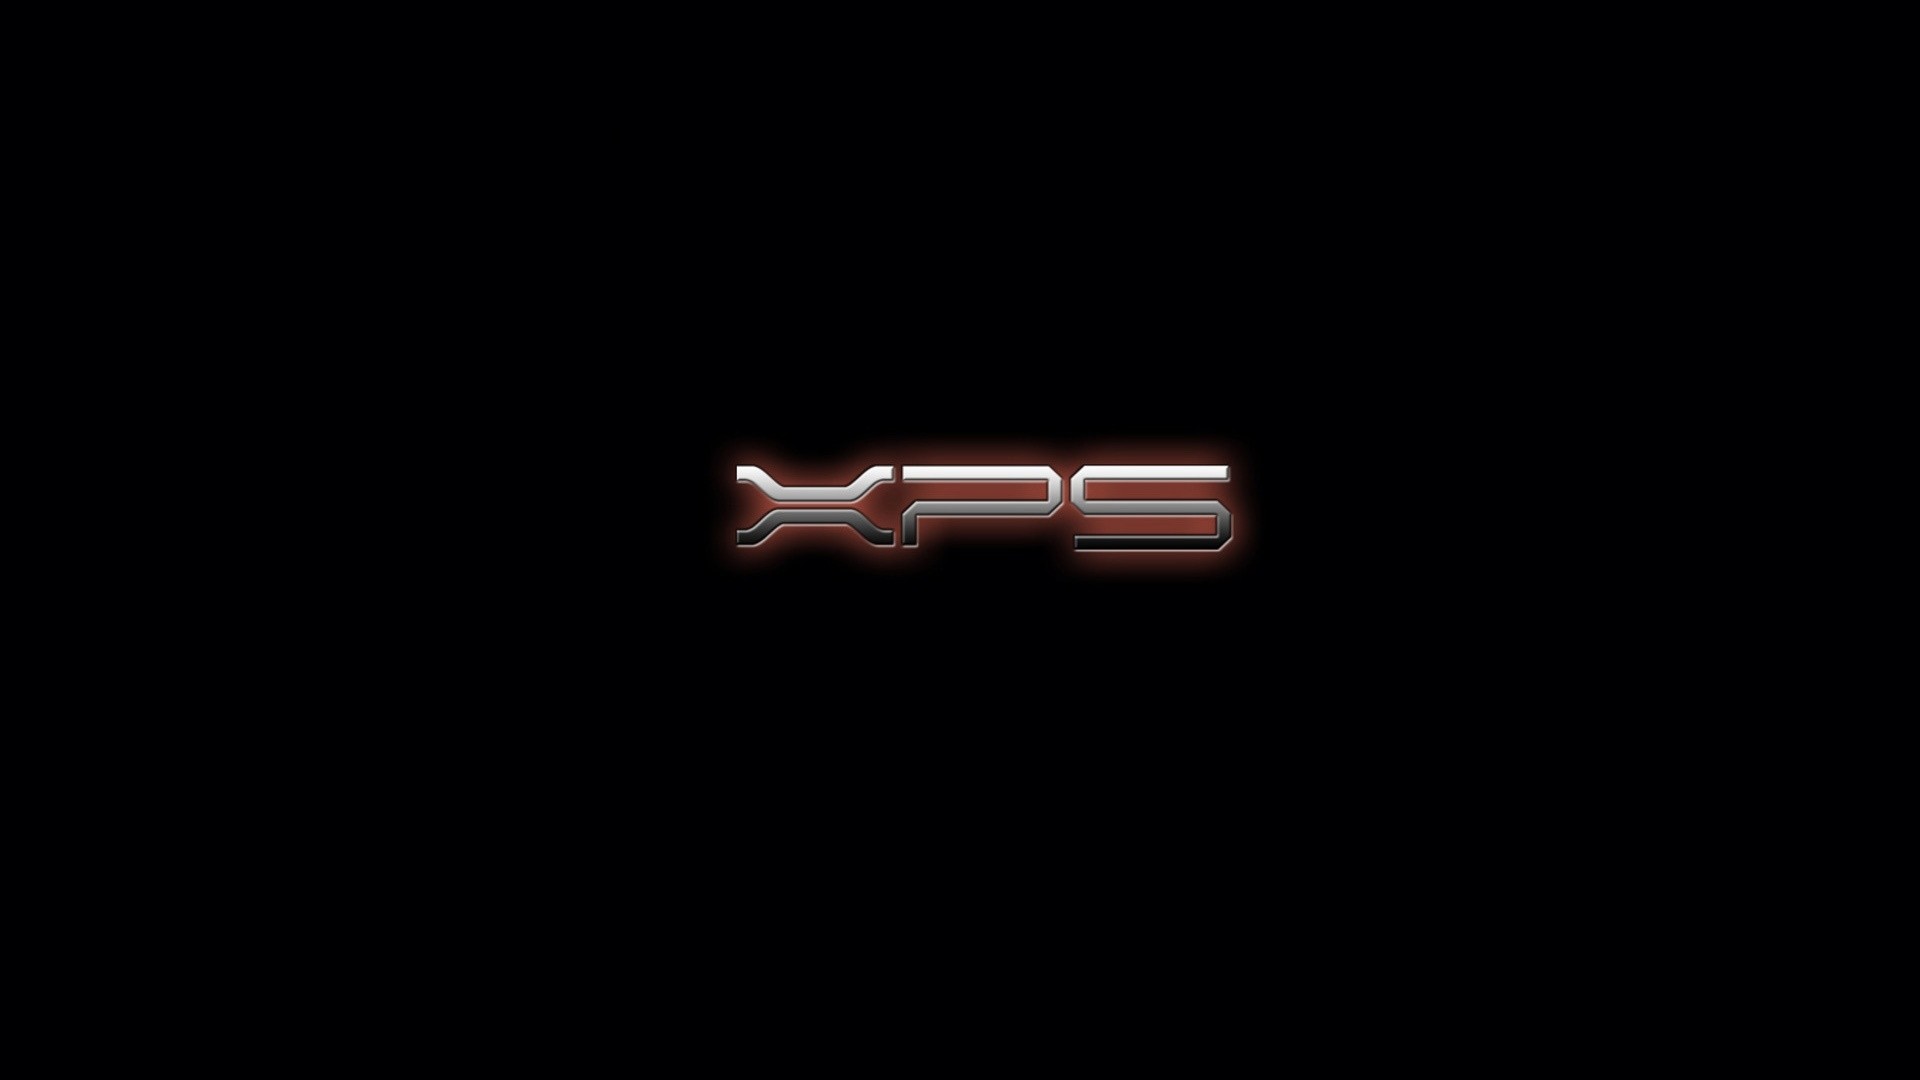 1920x1080 Dell xps Red Shadow HQ Wallpapers download 100 high quality 